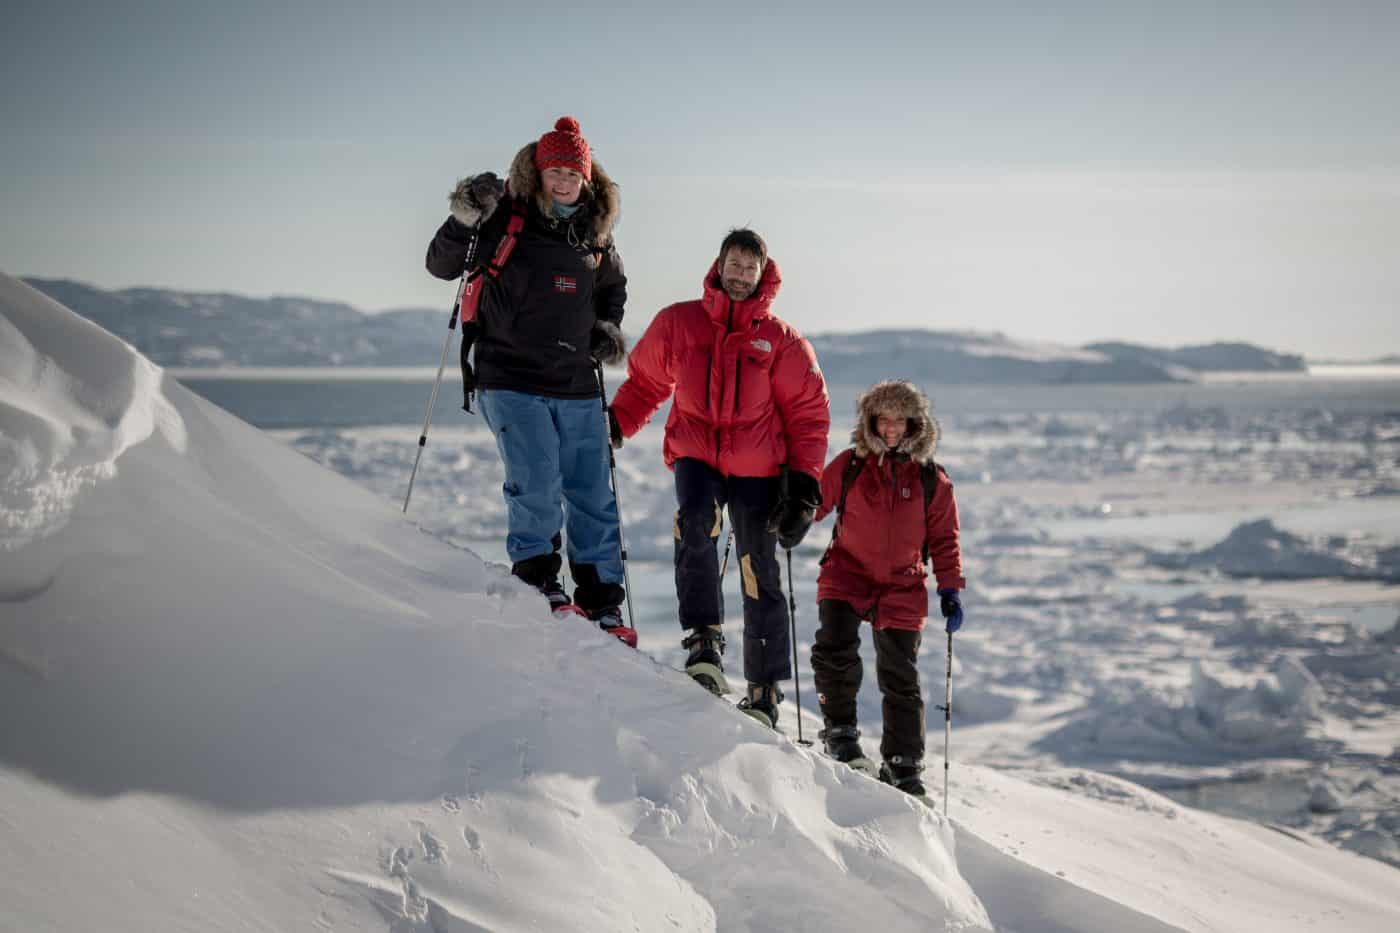 Three snowshoers on a PGI Greenland snowshoe trip near Ilulissat in Greenland. By Mads Pihl